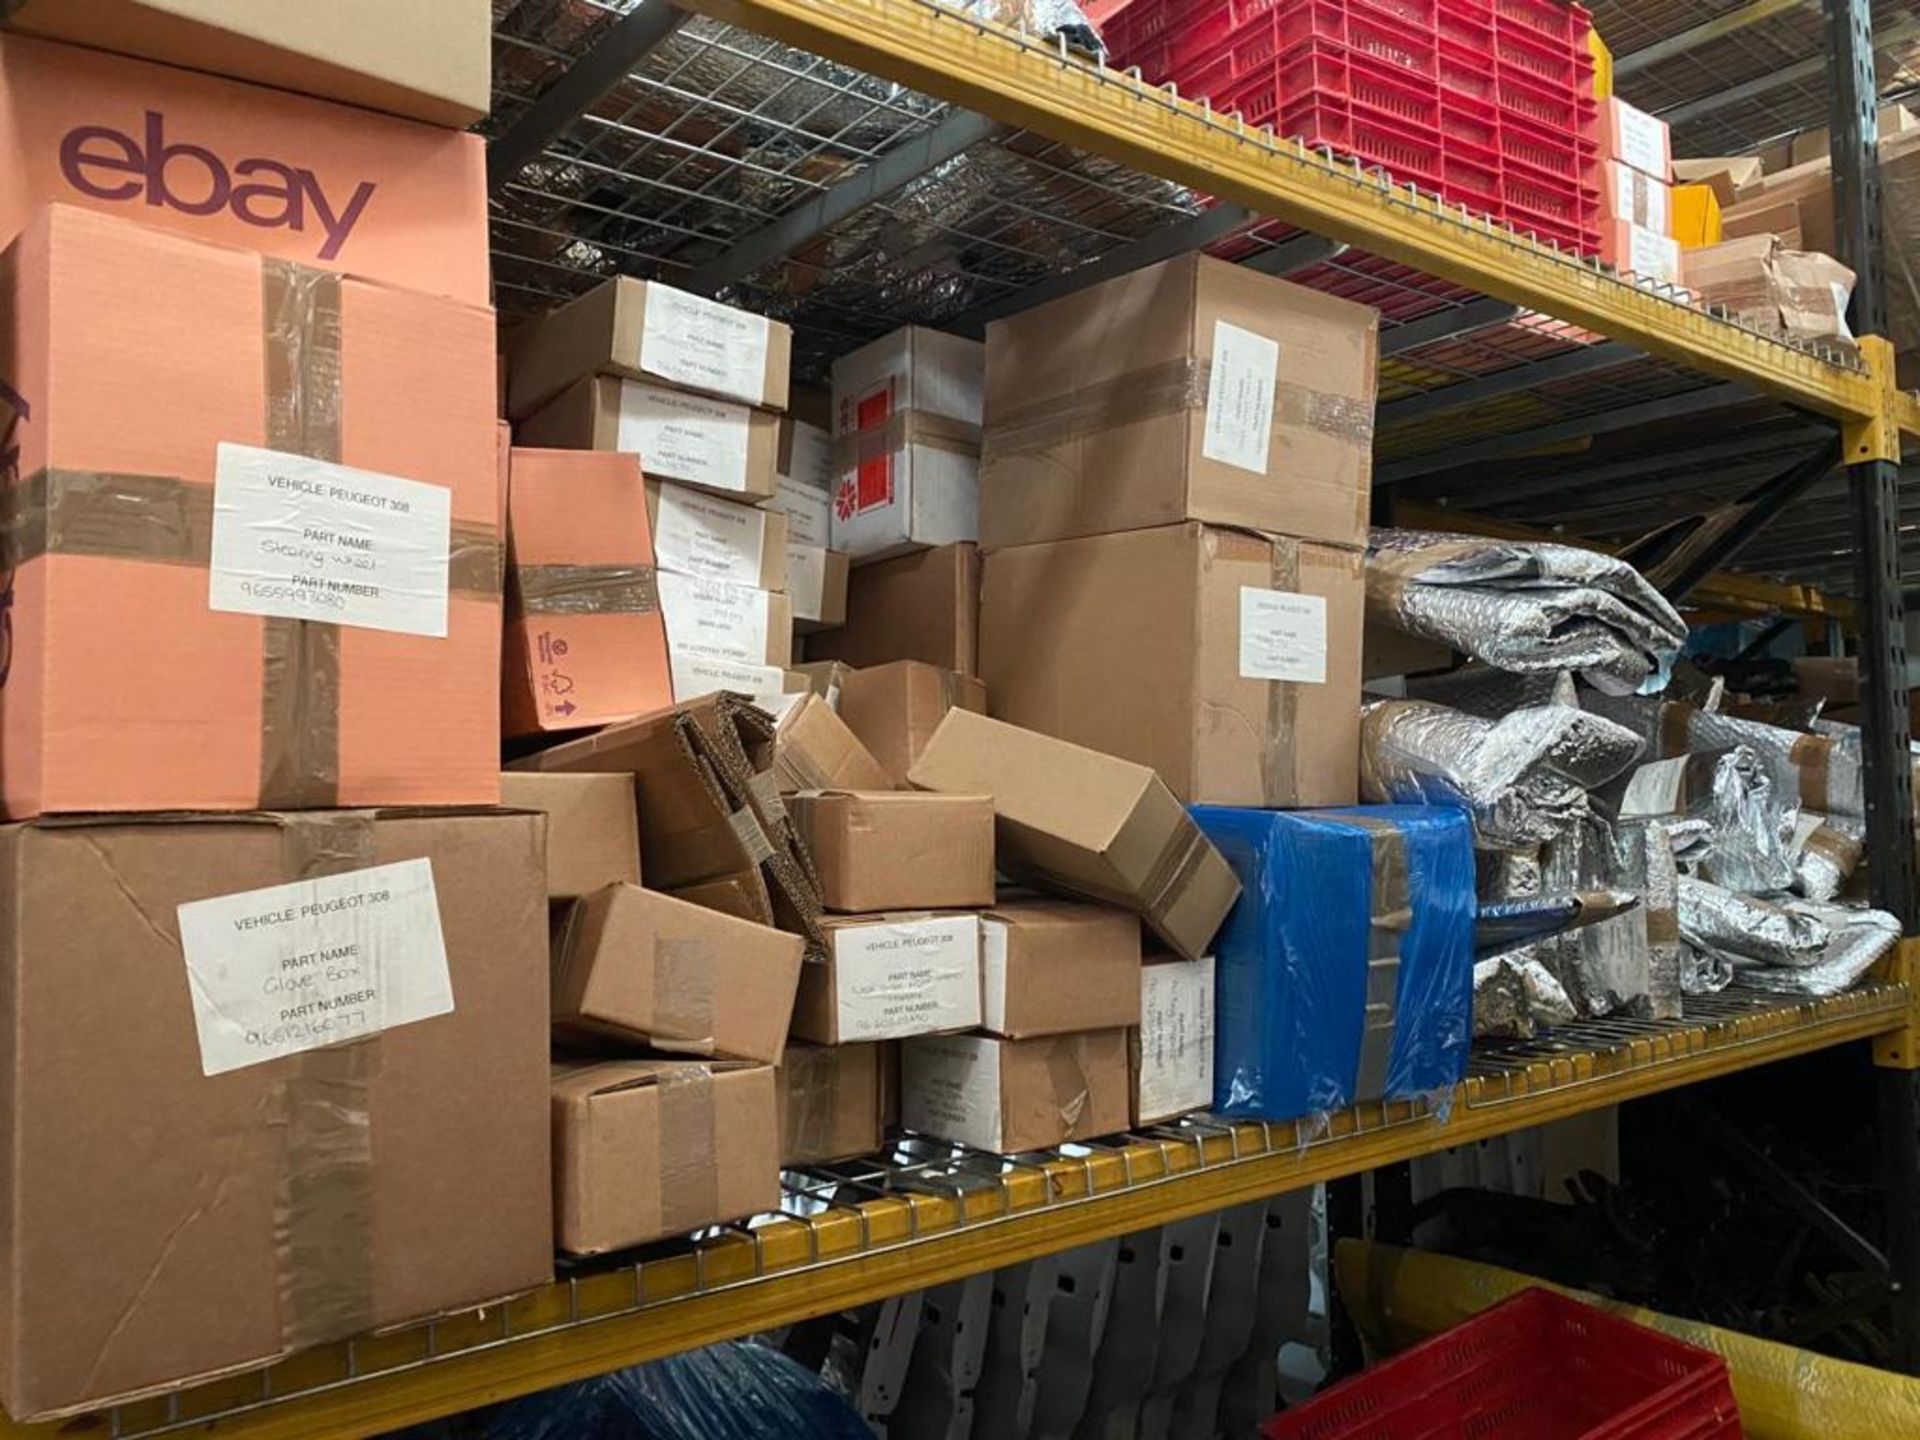 BULK ITEMS JOB LOT OF USED CAR PARTS - £350K ONGOING BUSINESS STOCK CLEARANCE FOR SALE! *NO VAT* - Image 20 of 95